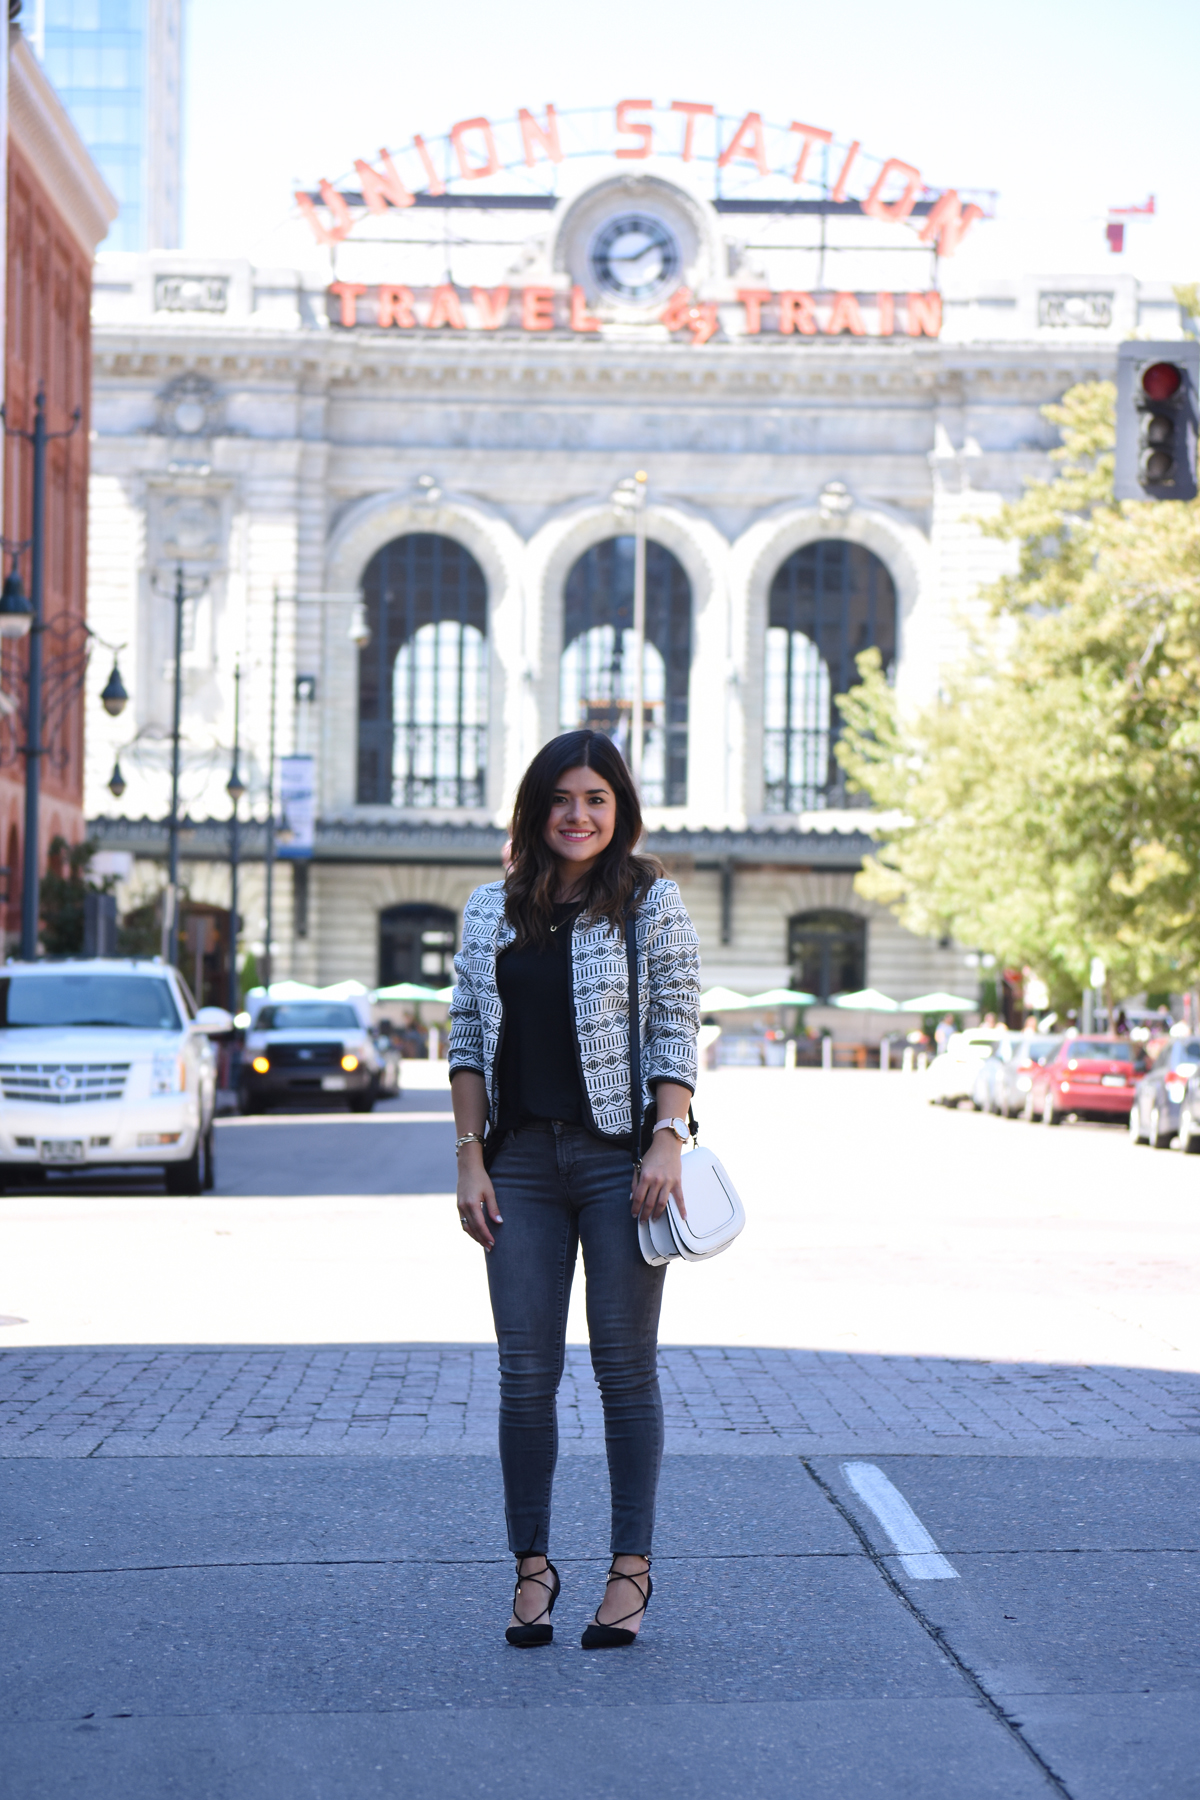 Carolina Hella of Chic Talk wearing Old Navy Skinny jeans, jacquard jacket, Sole society white bag, and Aldo pointy heels - #50Styles50States CAMPAIGN WITH OLD NAVY STYLE by popular Denver fashion blogger Chic Talk